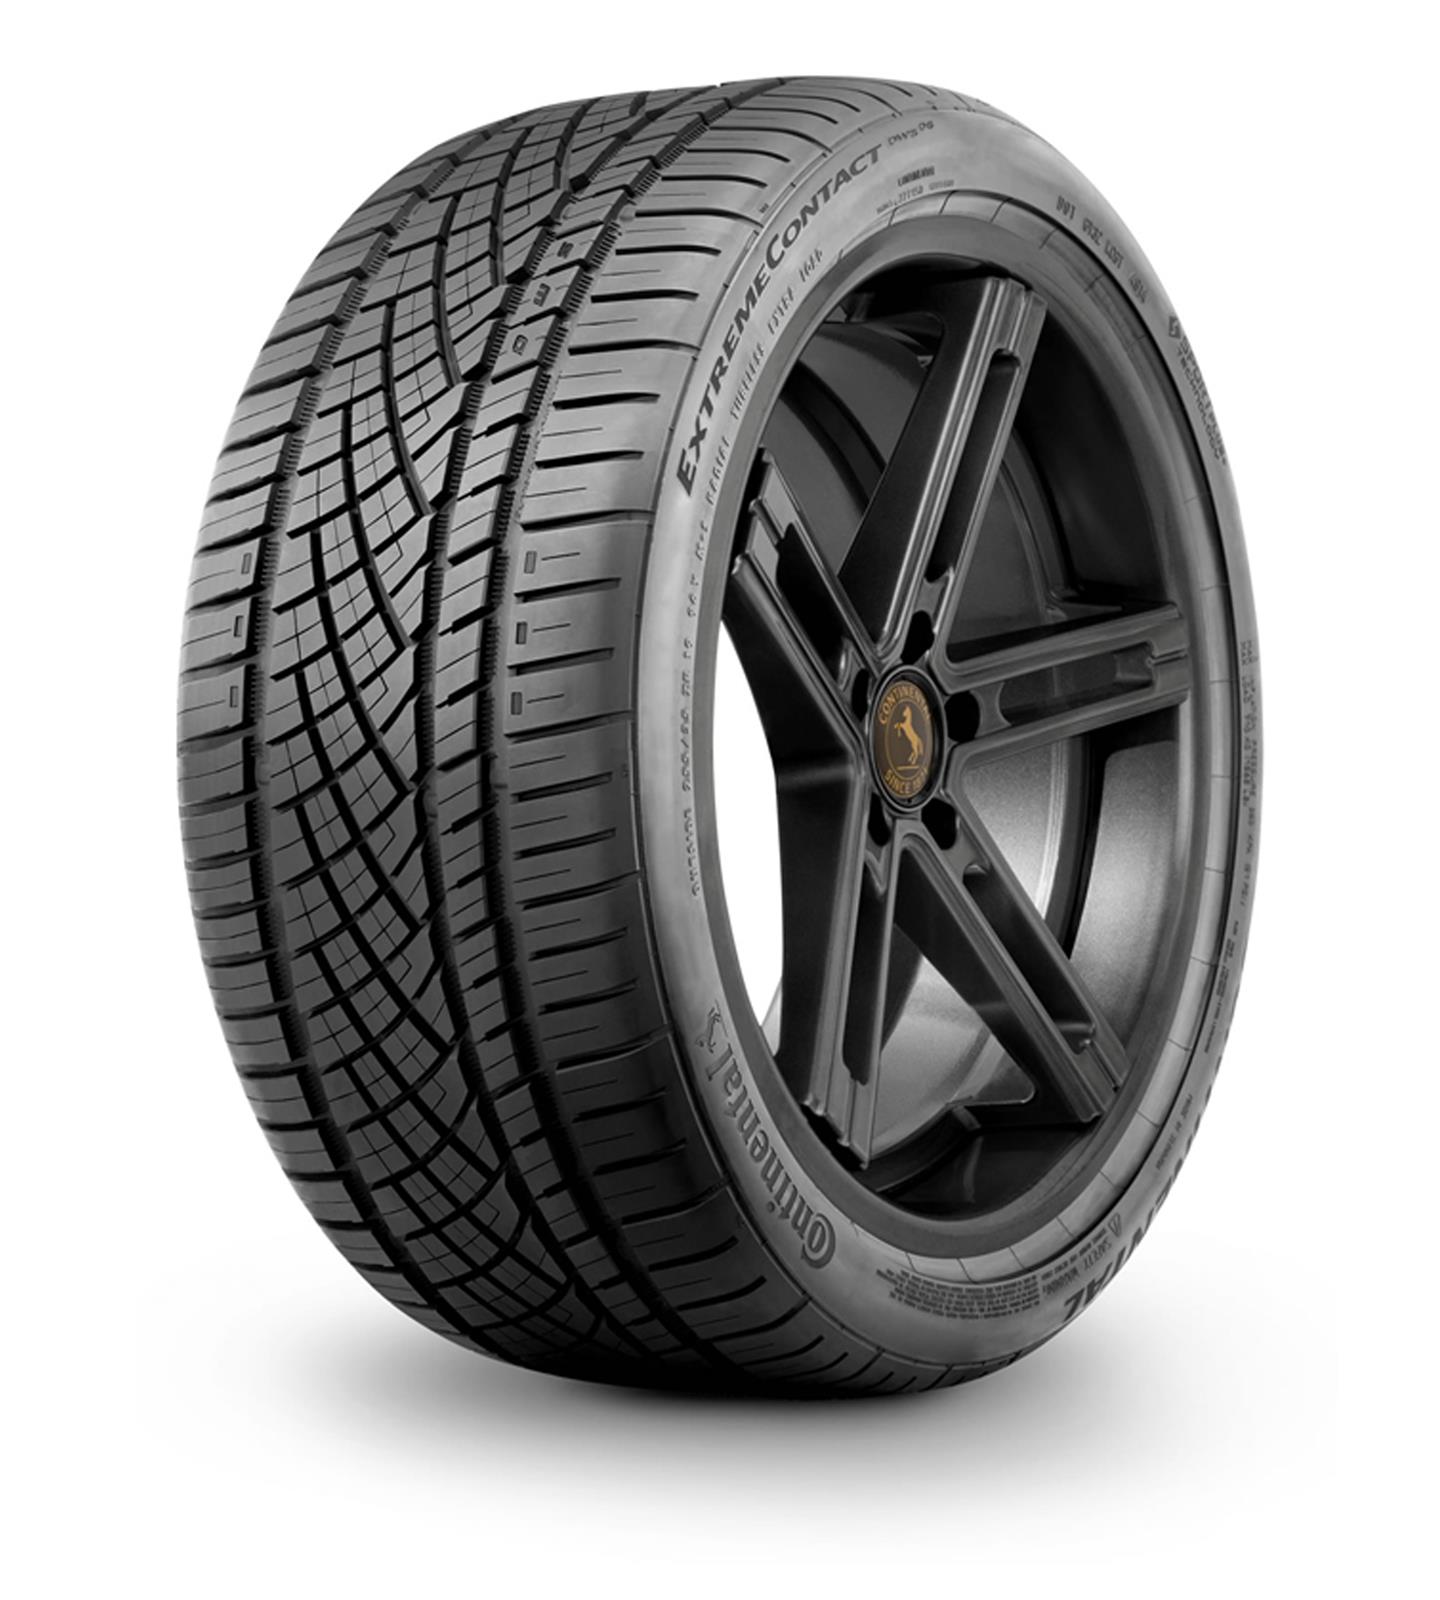 Continental Tire Offer Code